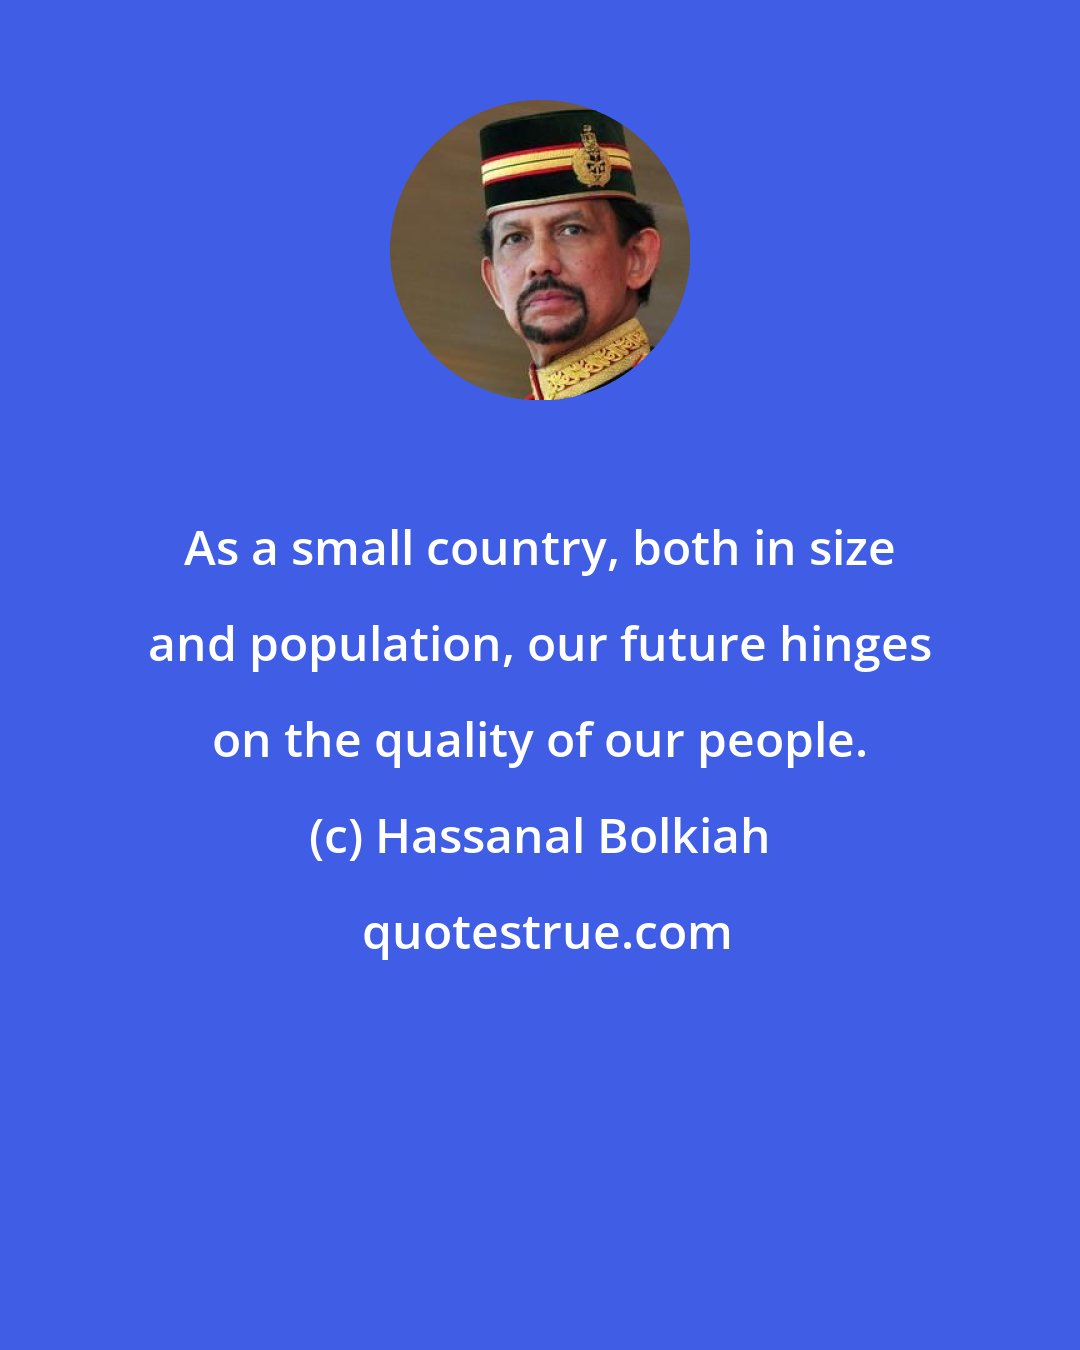 Hassanal Bolkiah: As a small country, both in size and population, our future hinges on the quality of our people.